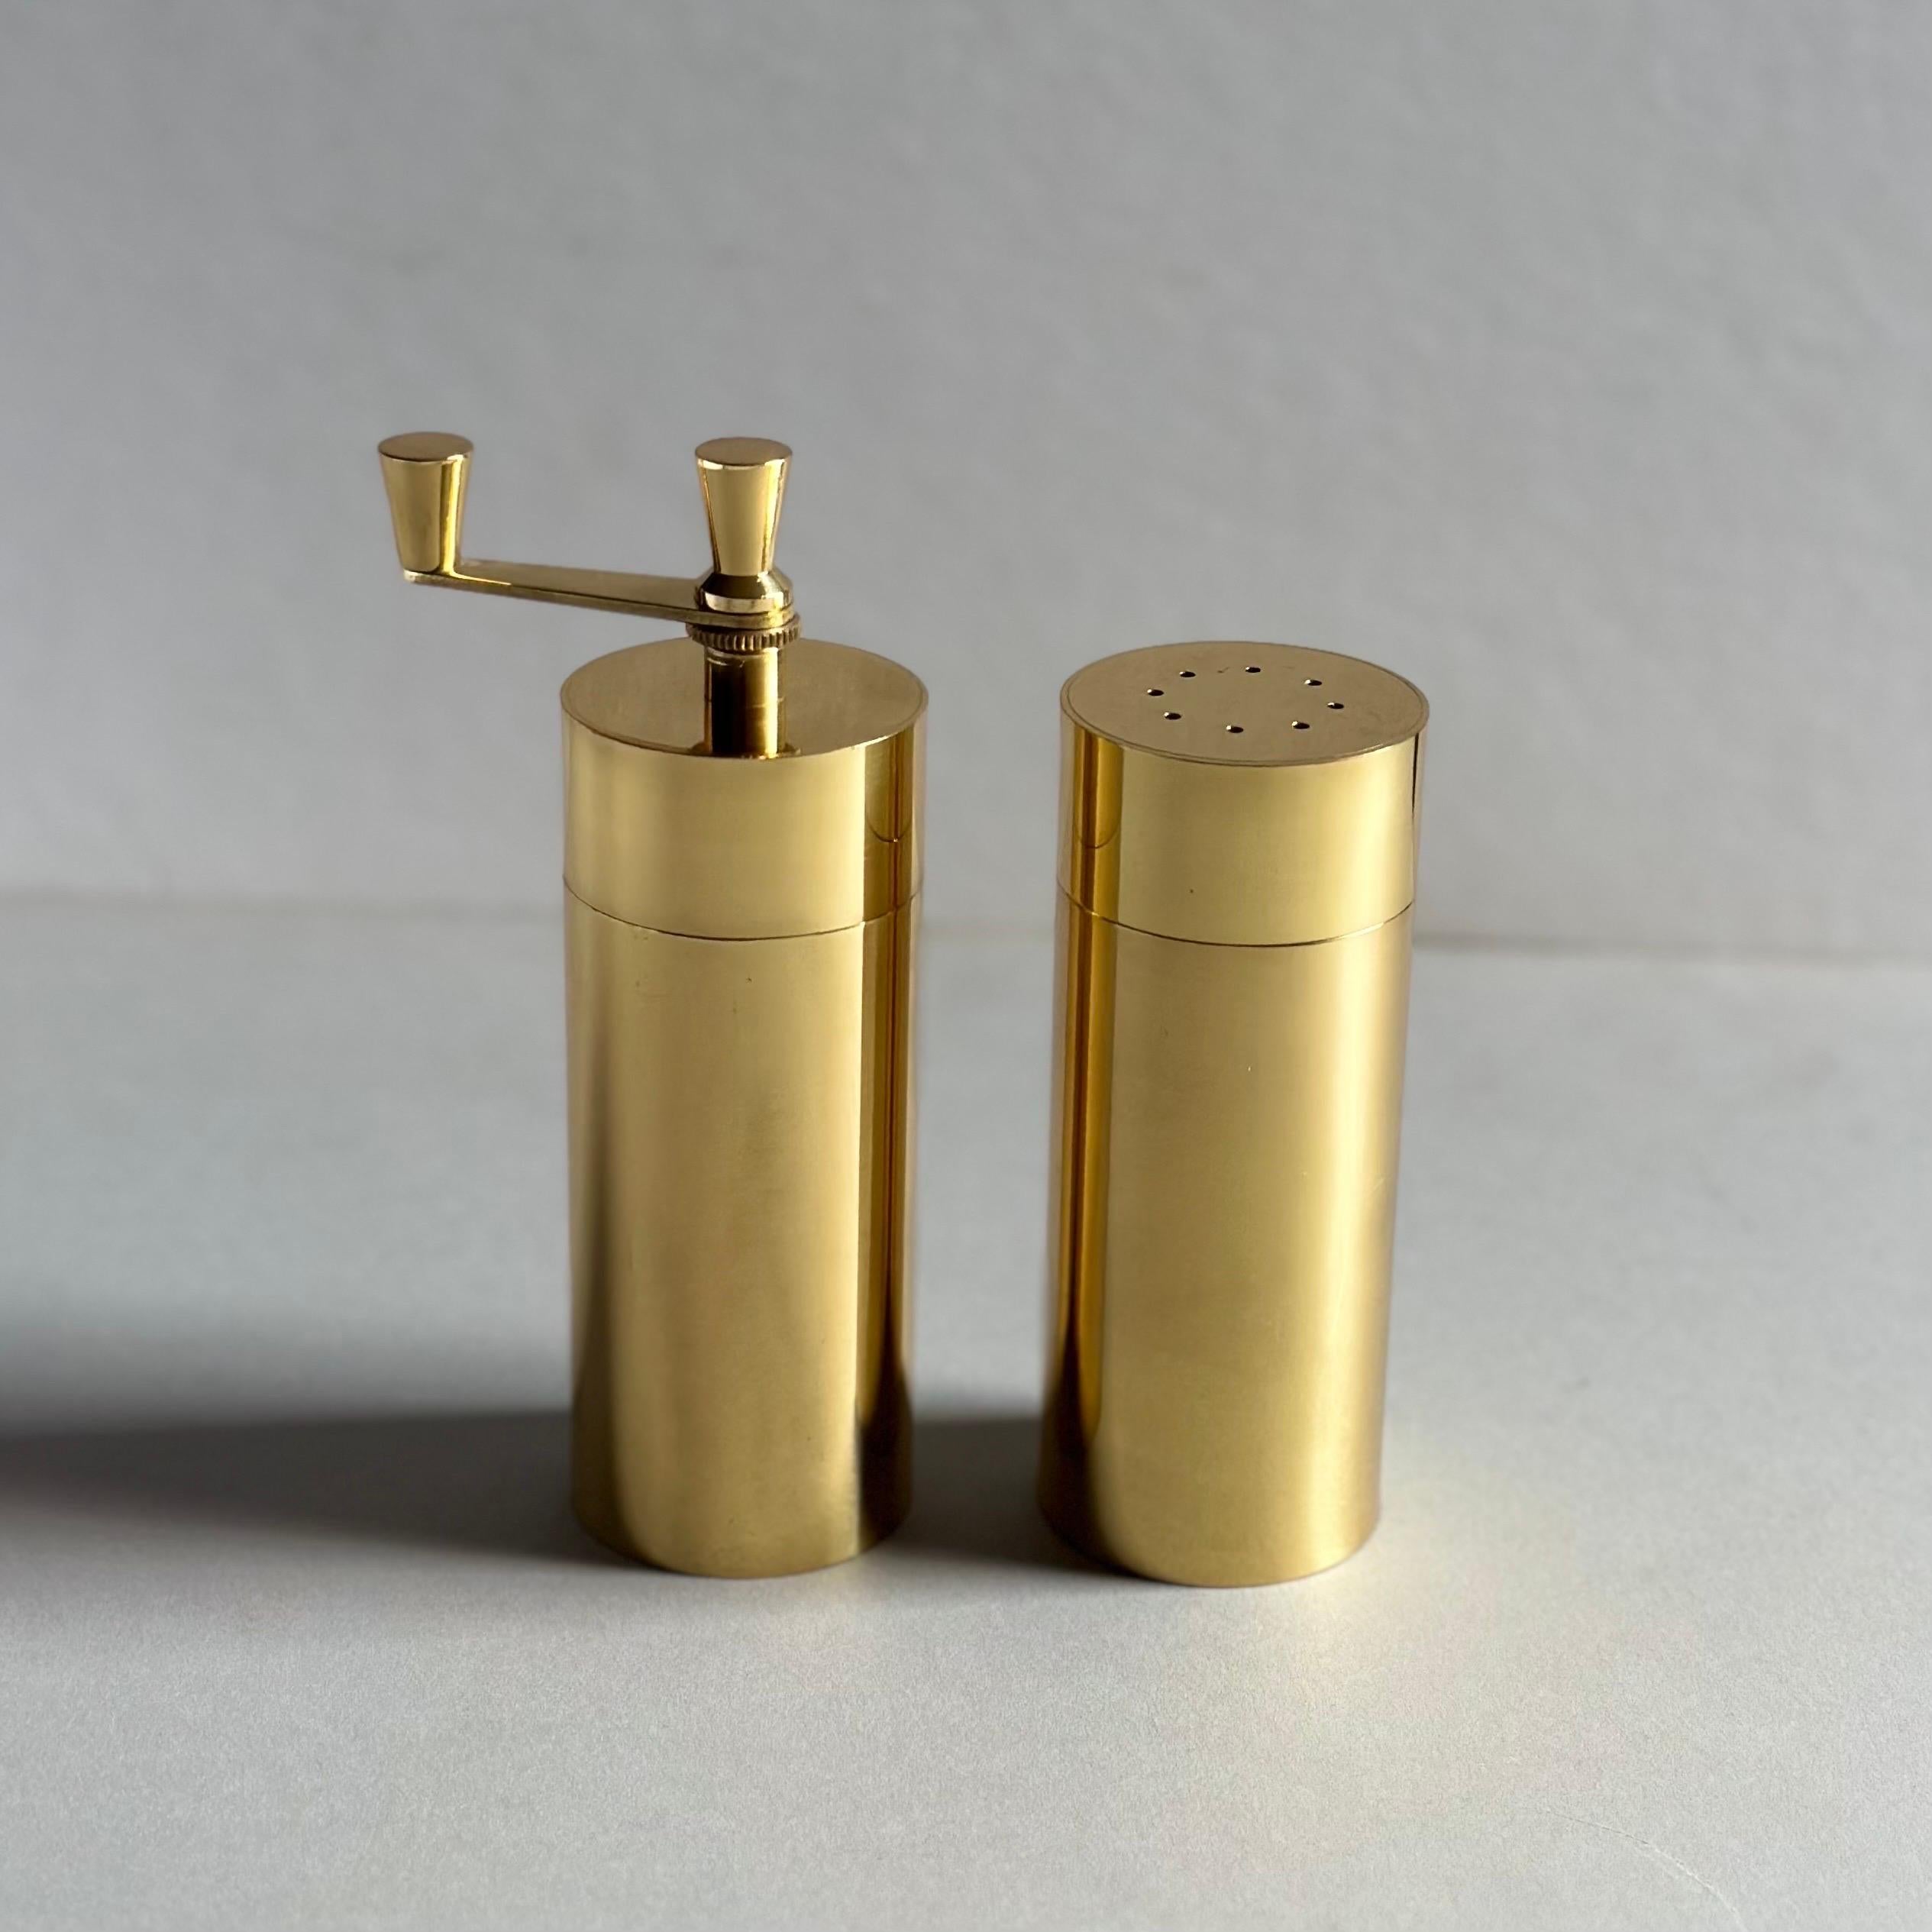 An exceptional quality, modernist salt and pepper set executed in lacquered, solid brass, made in Italy. In impeccable, unused condition and with original presentation box labeled, 